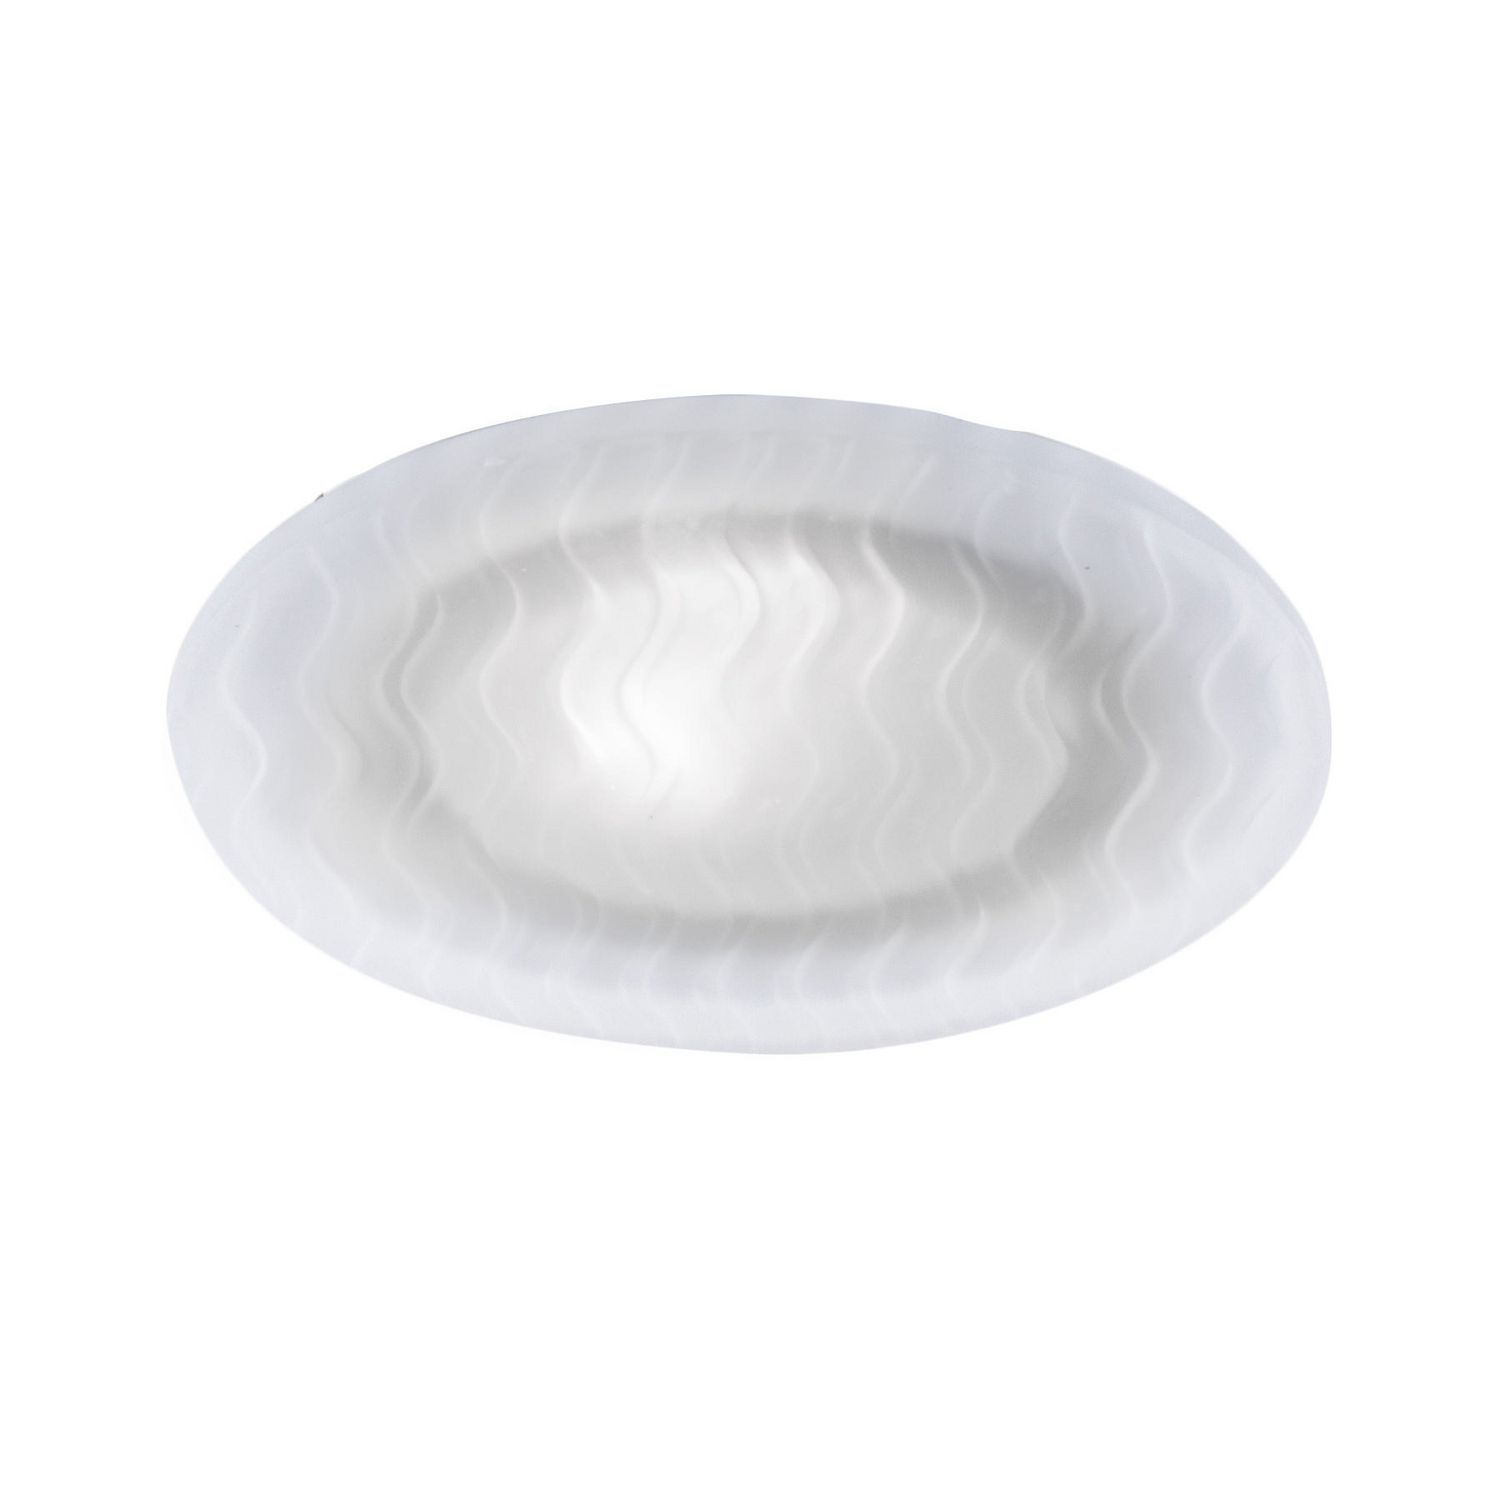 Bazz 100-230D 100 Series Closed Glass Recessed Fixture Kit White 5-in Damp Location Dimmable